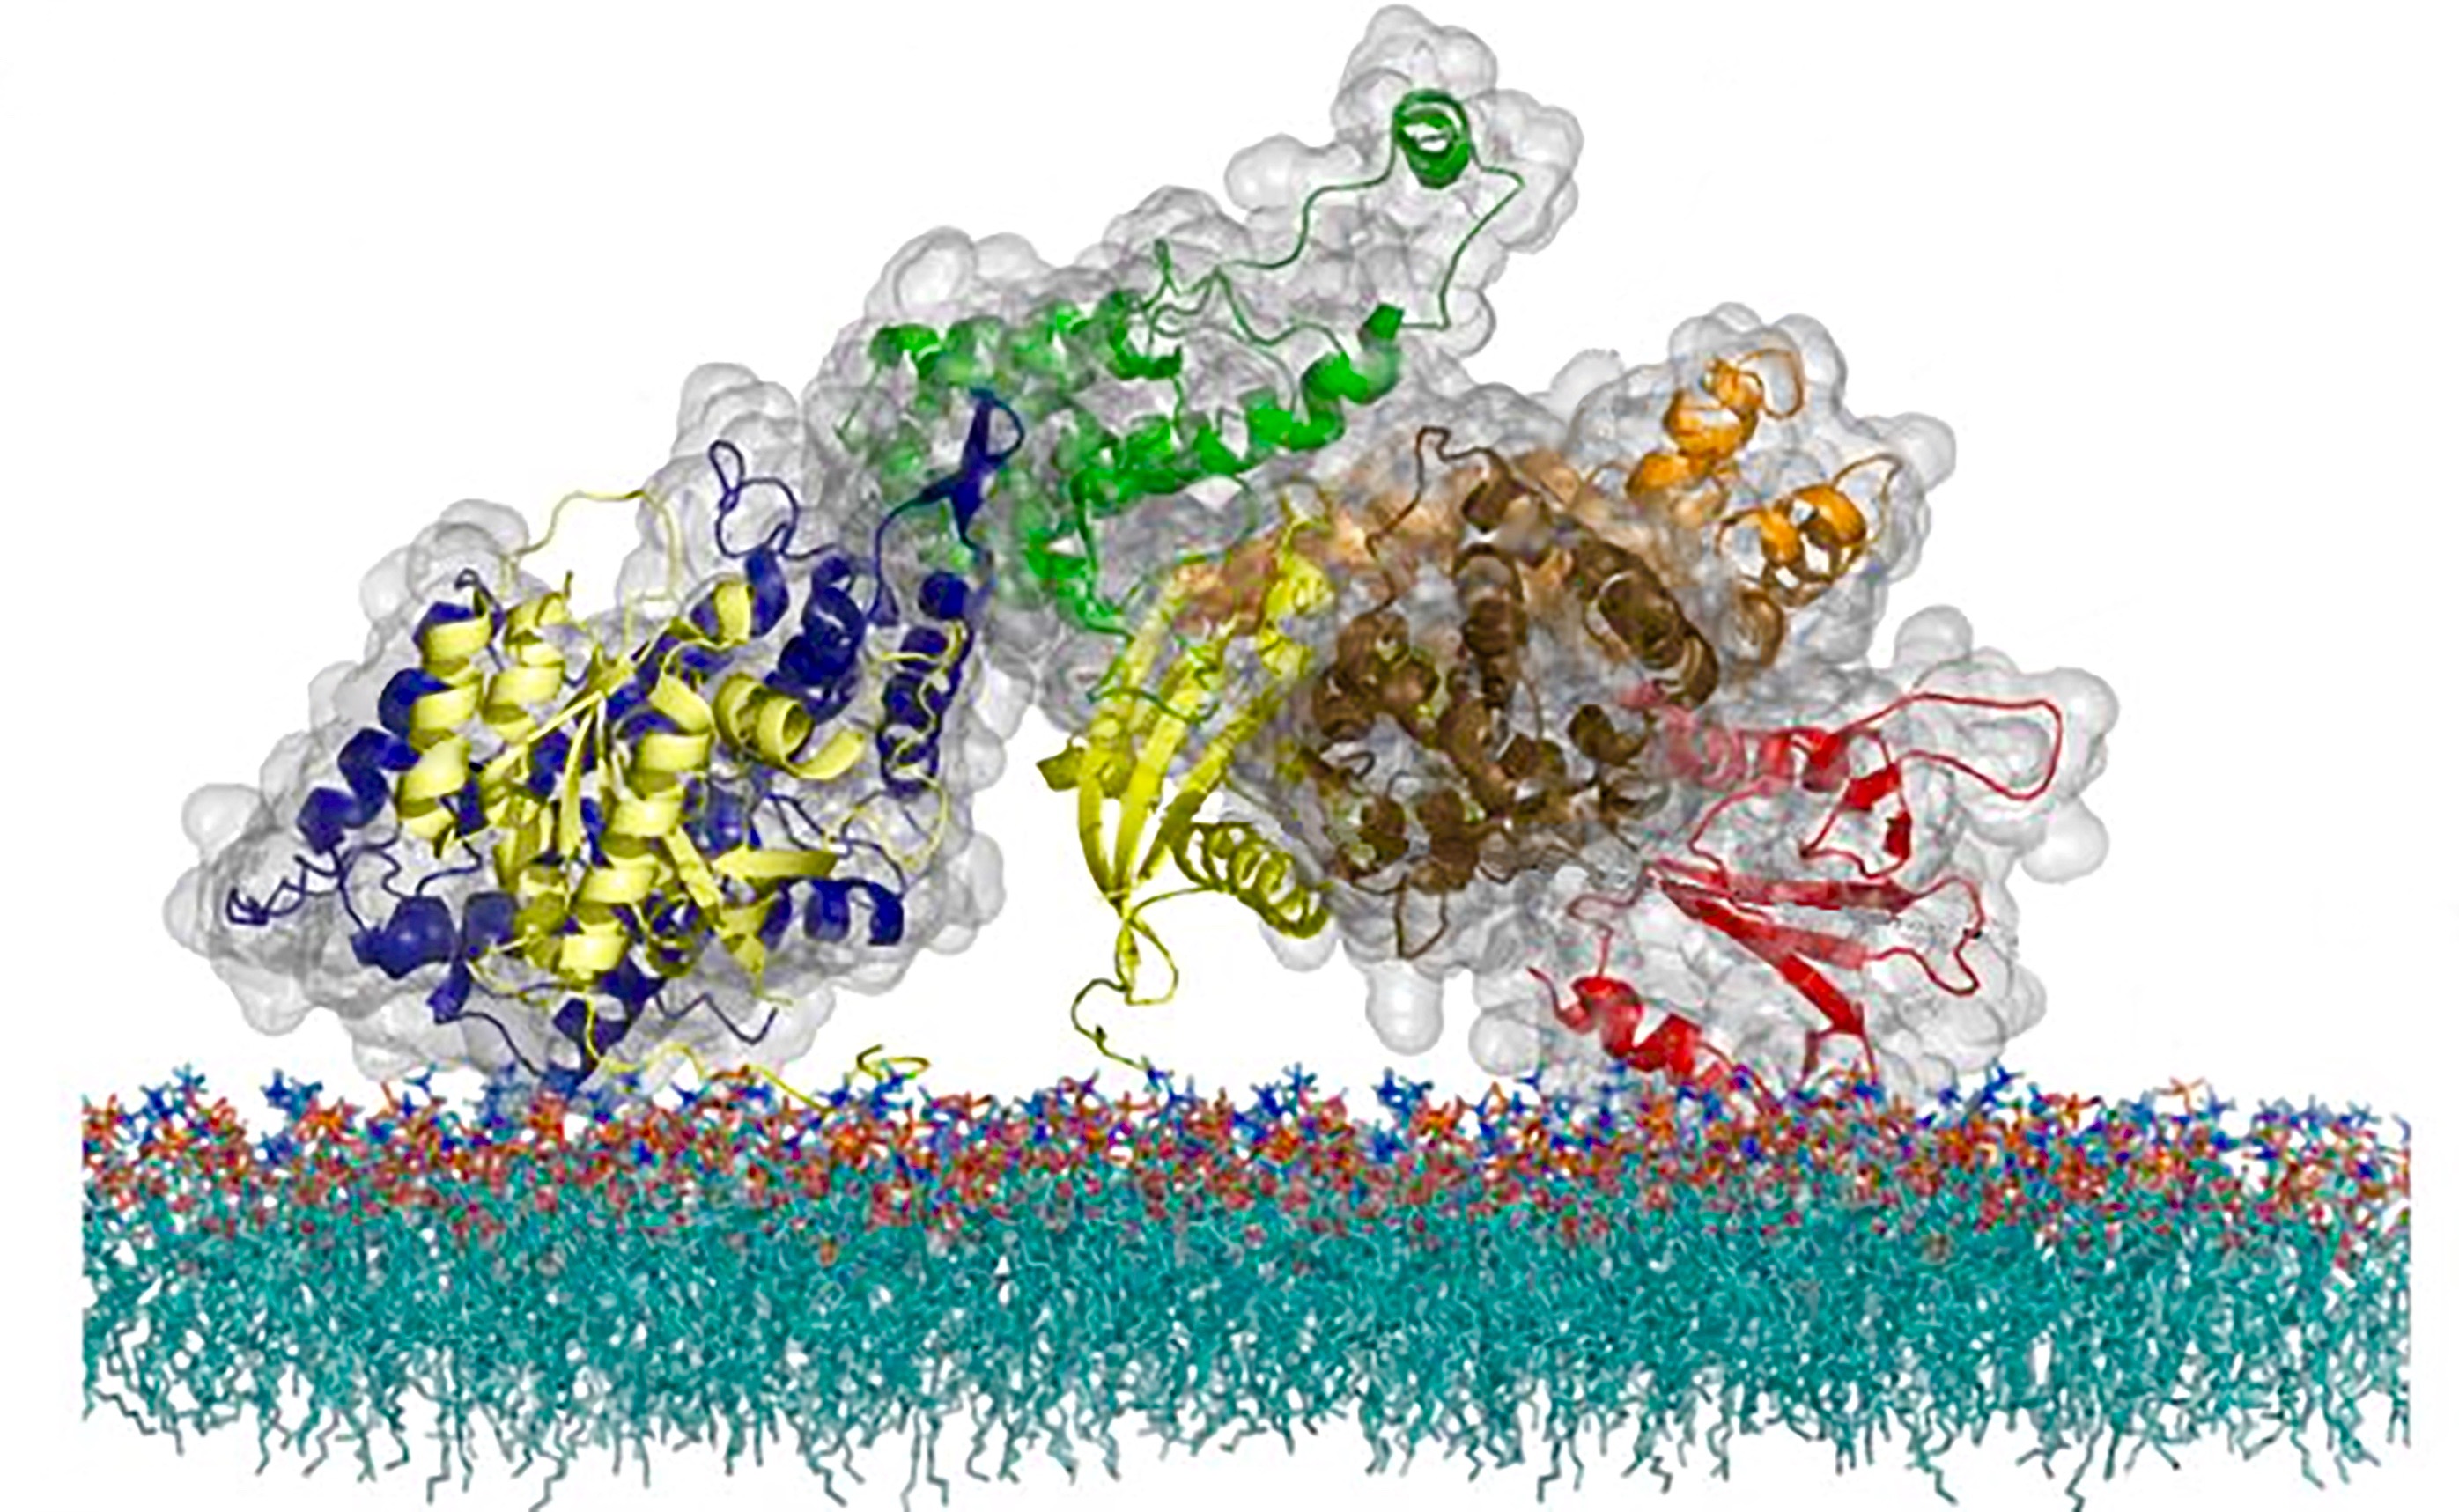 The atomic structure of the SOS protein, a cell messaging molecule that uses a unique timing mechanism to regulate activation of a critical immune system pathway.